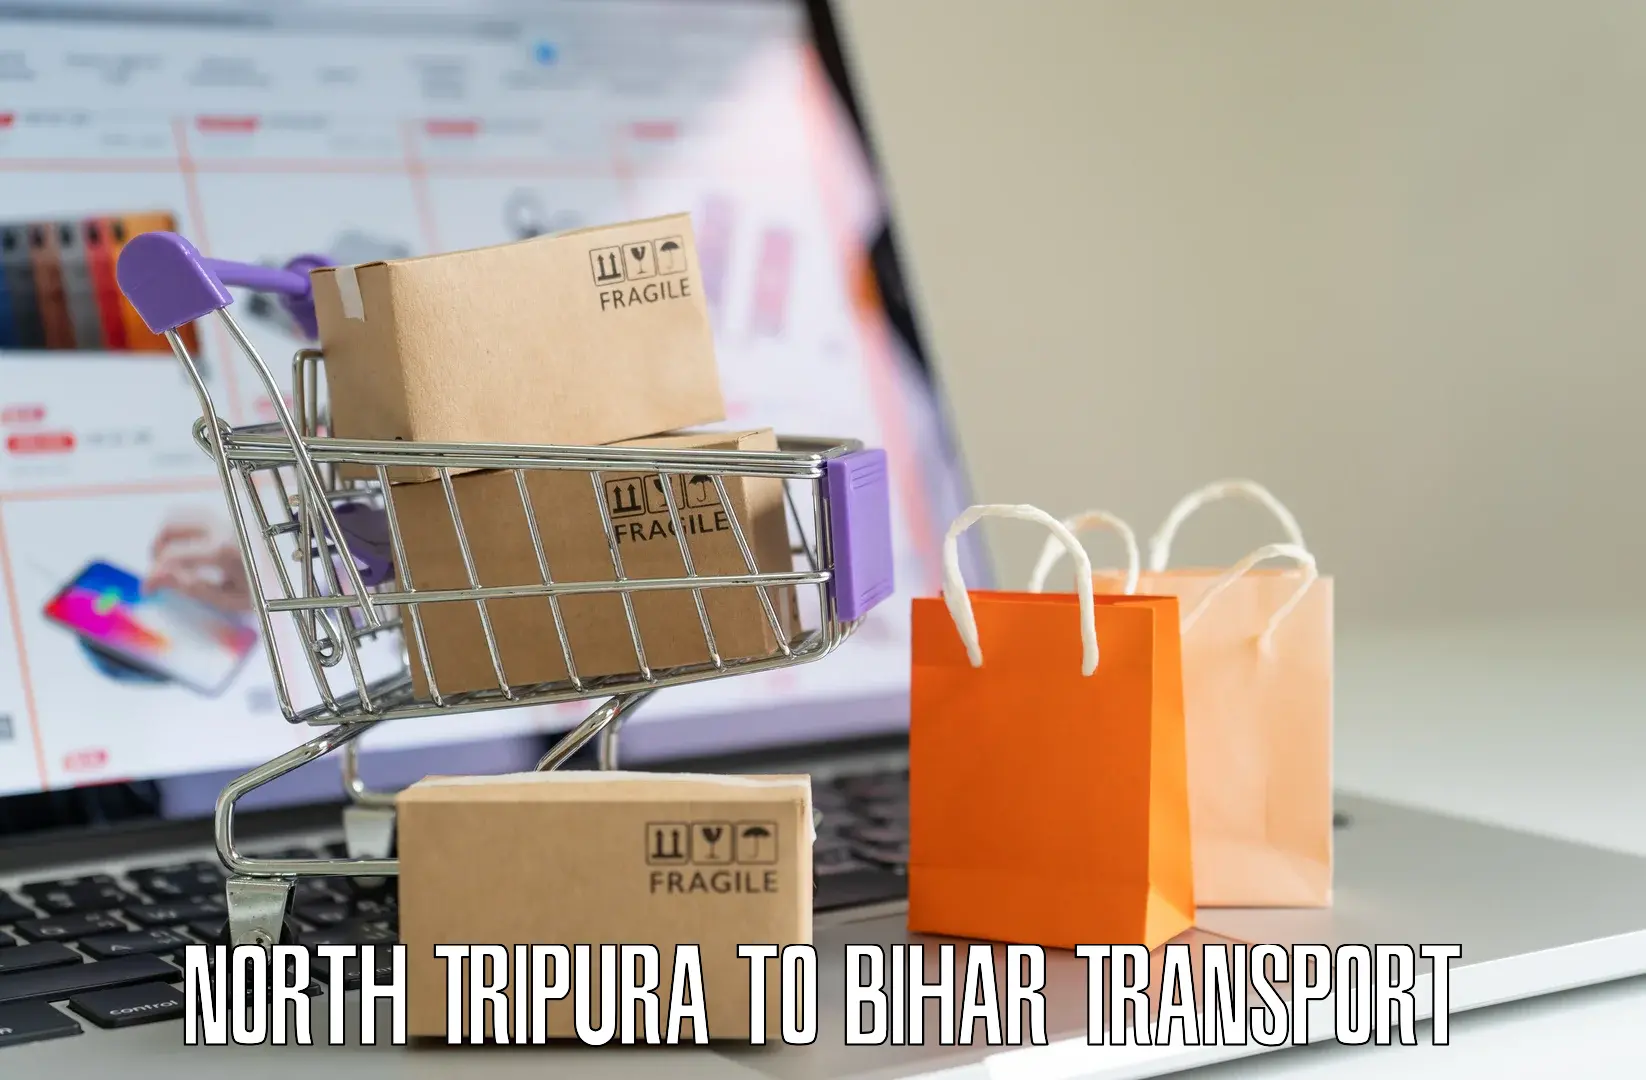 Commercial transport service North Tripura to Bhorey